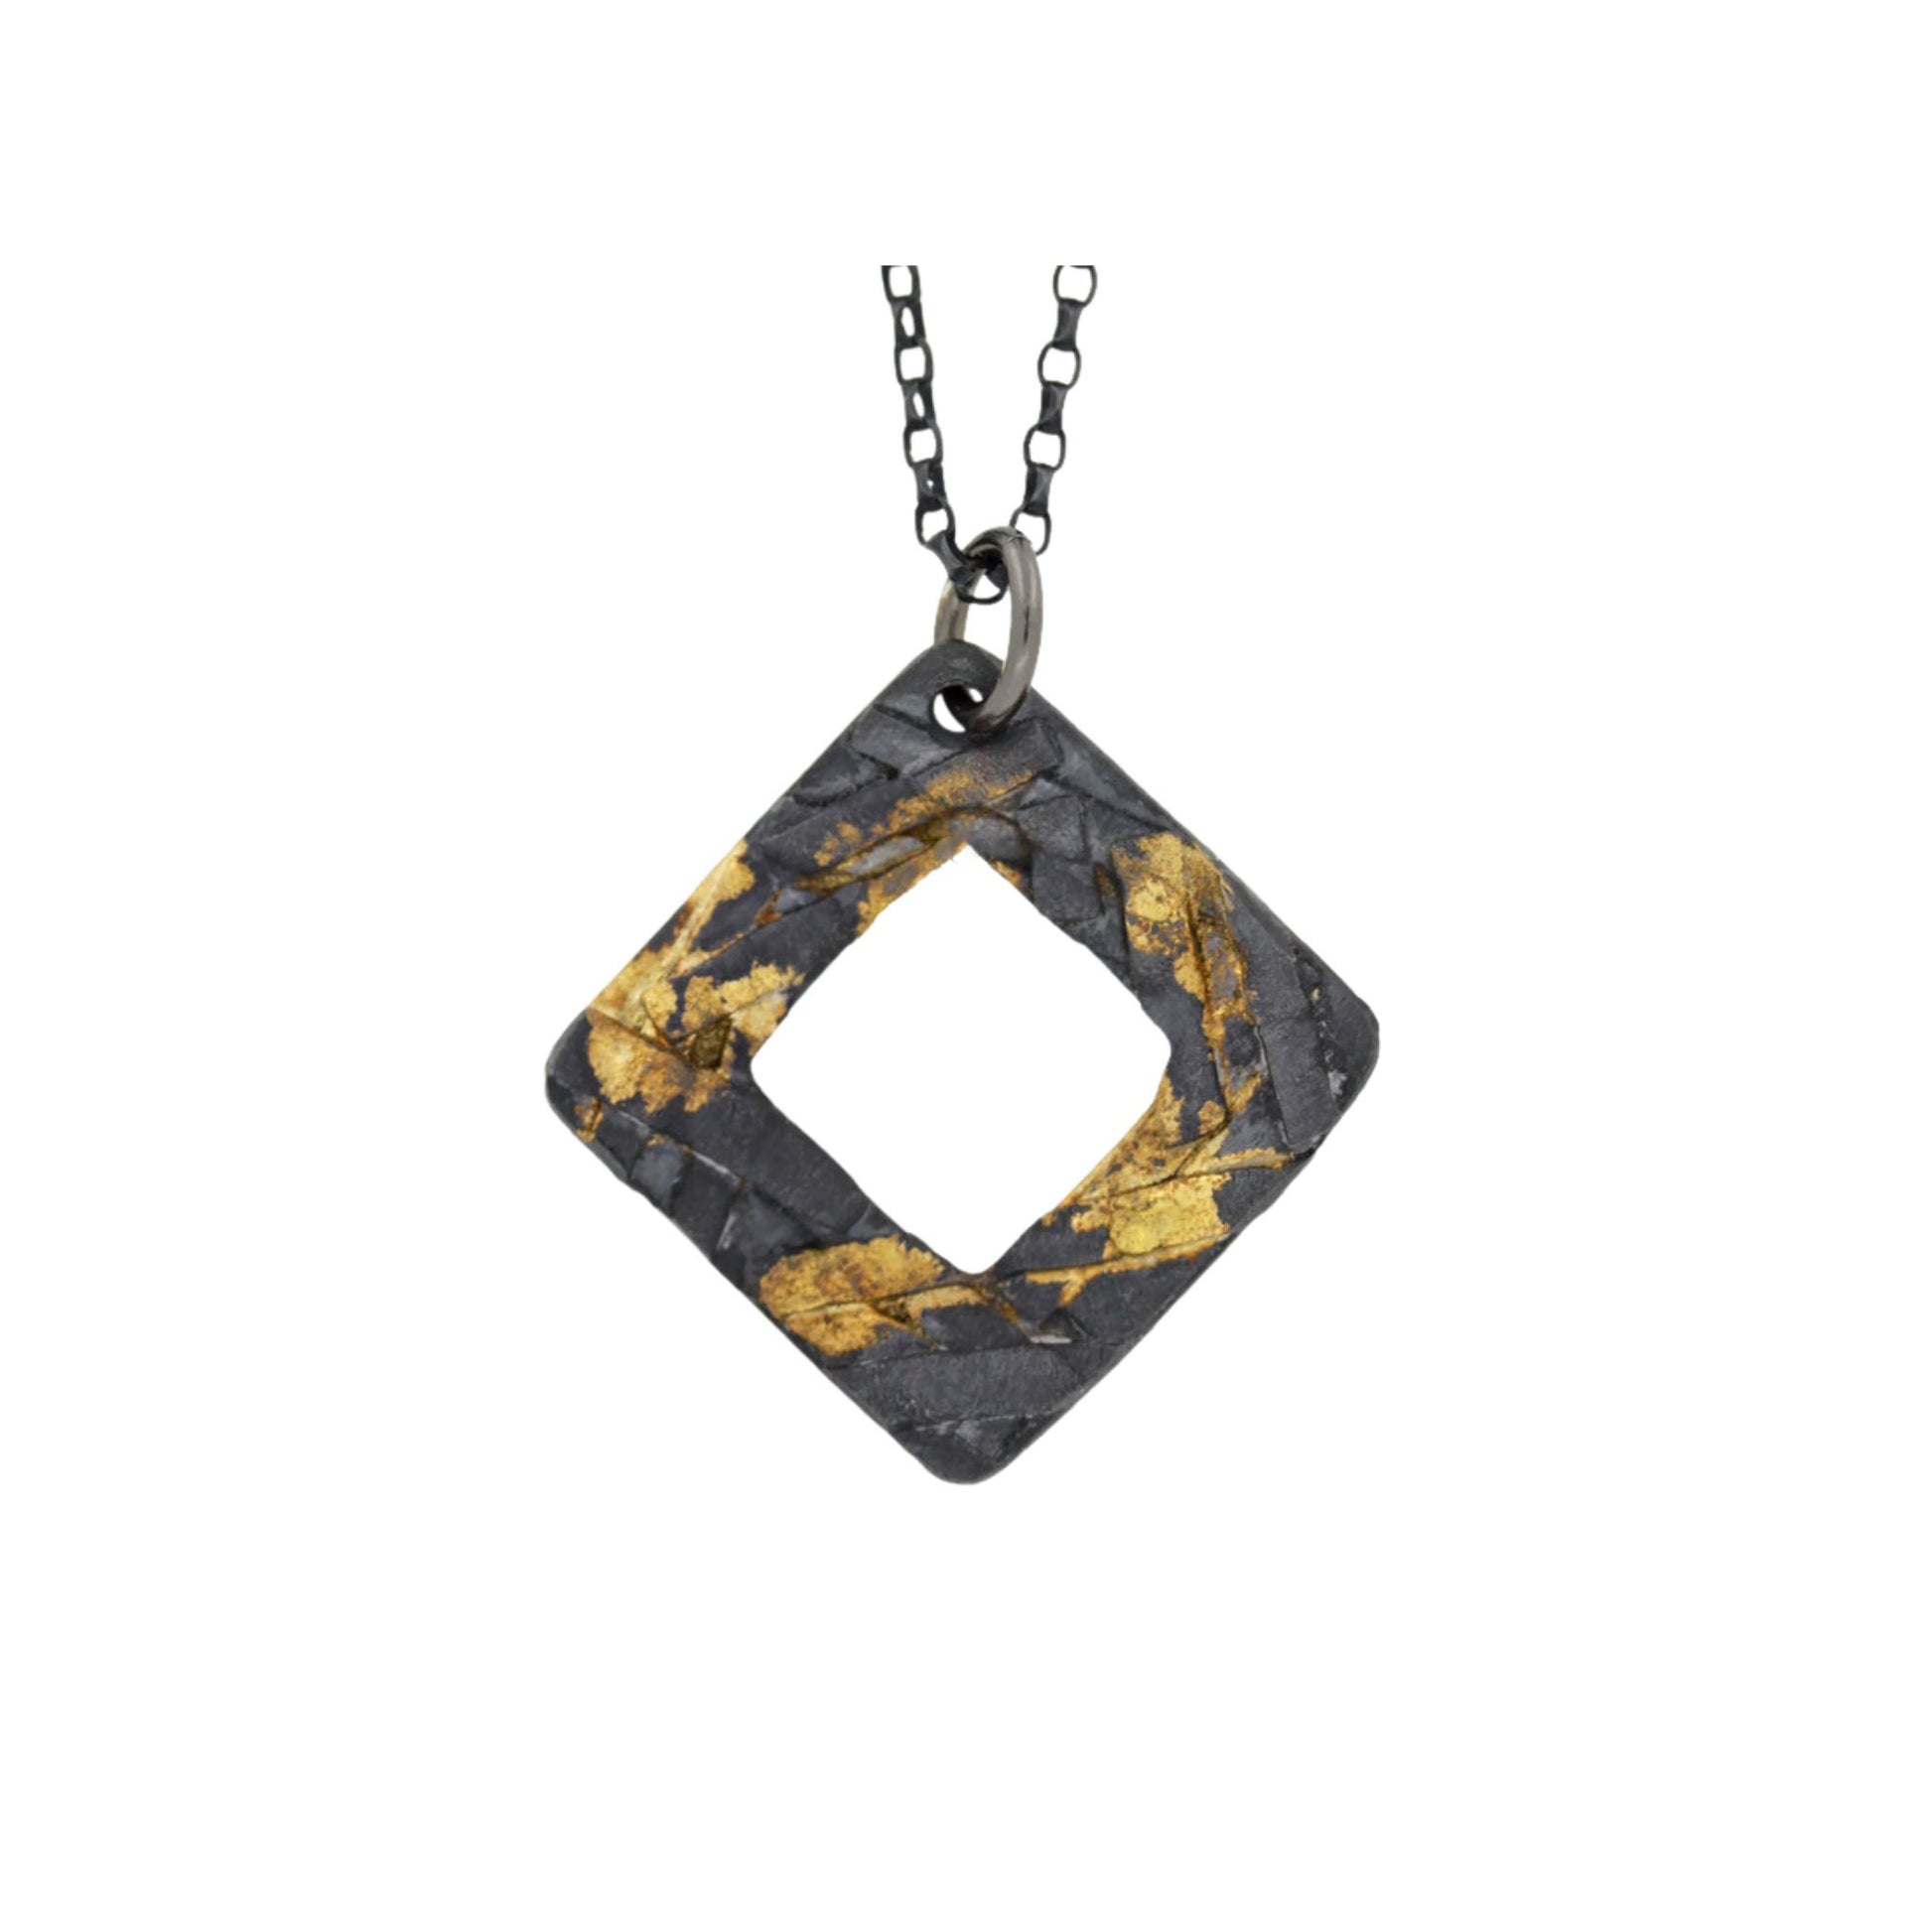 Oxidized silver and gold square washer necklace